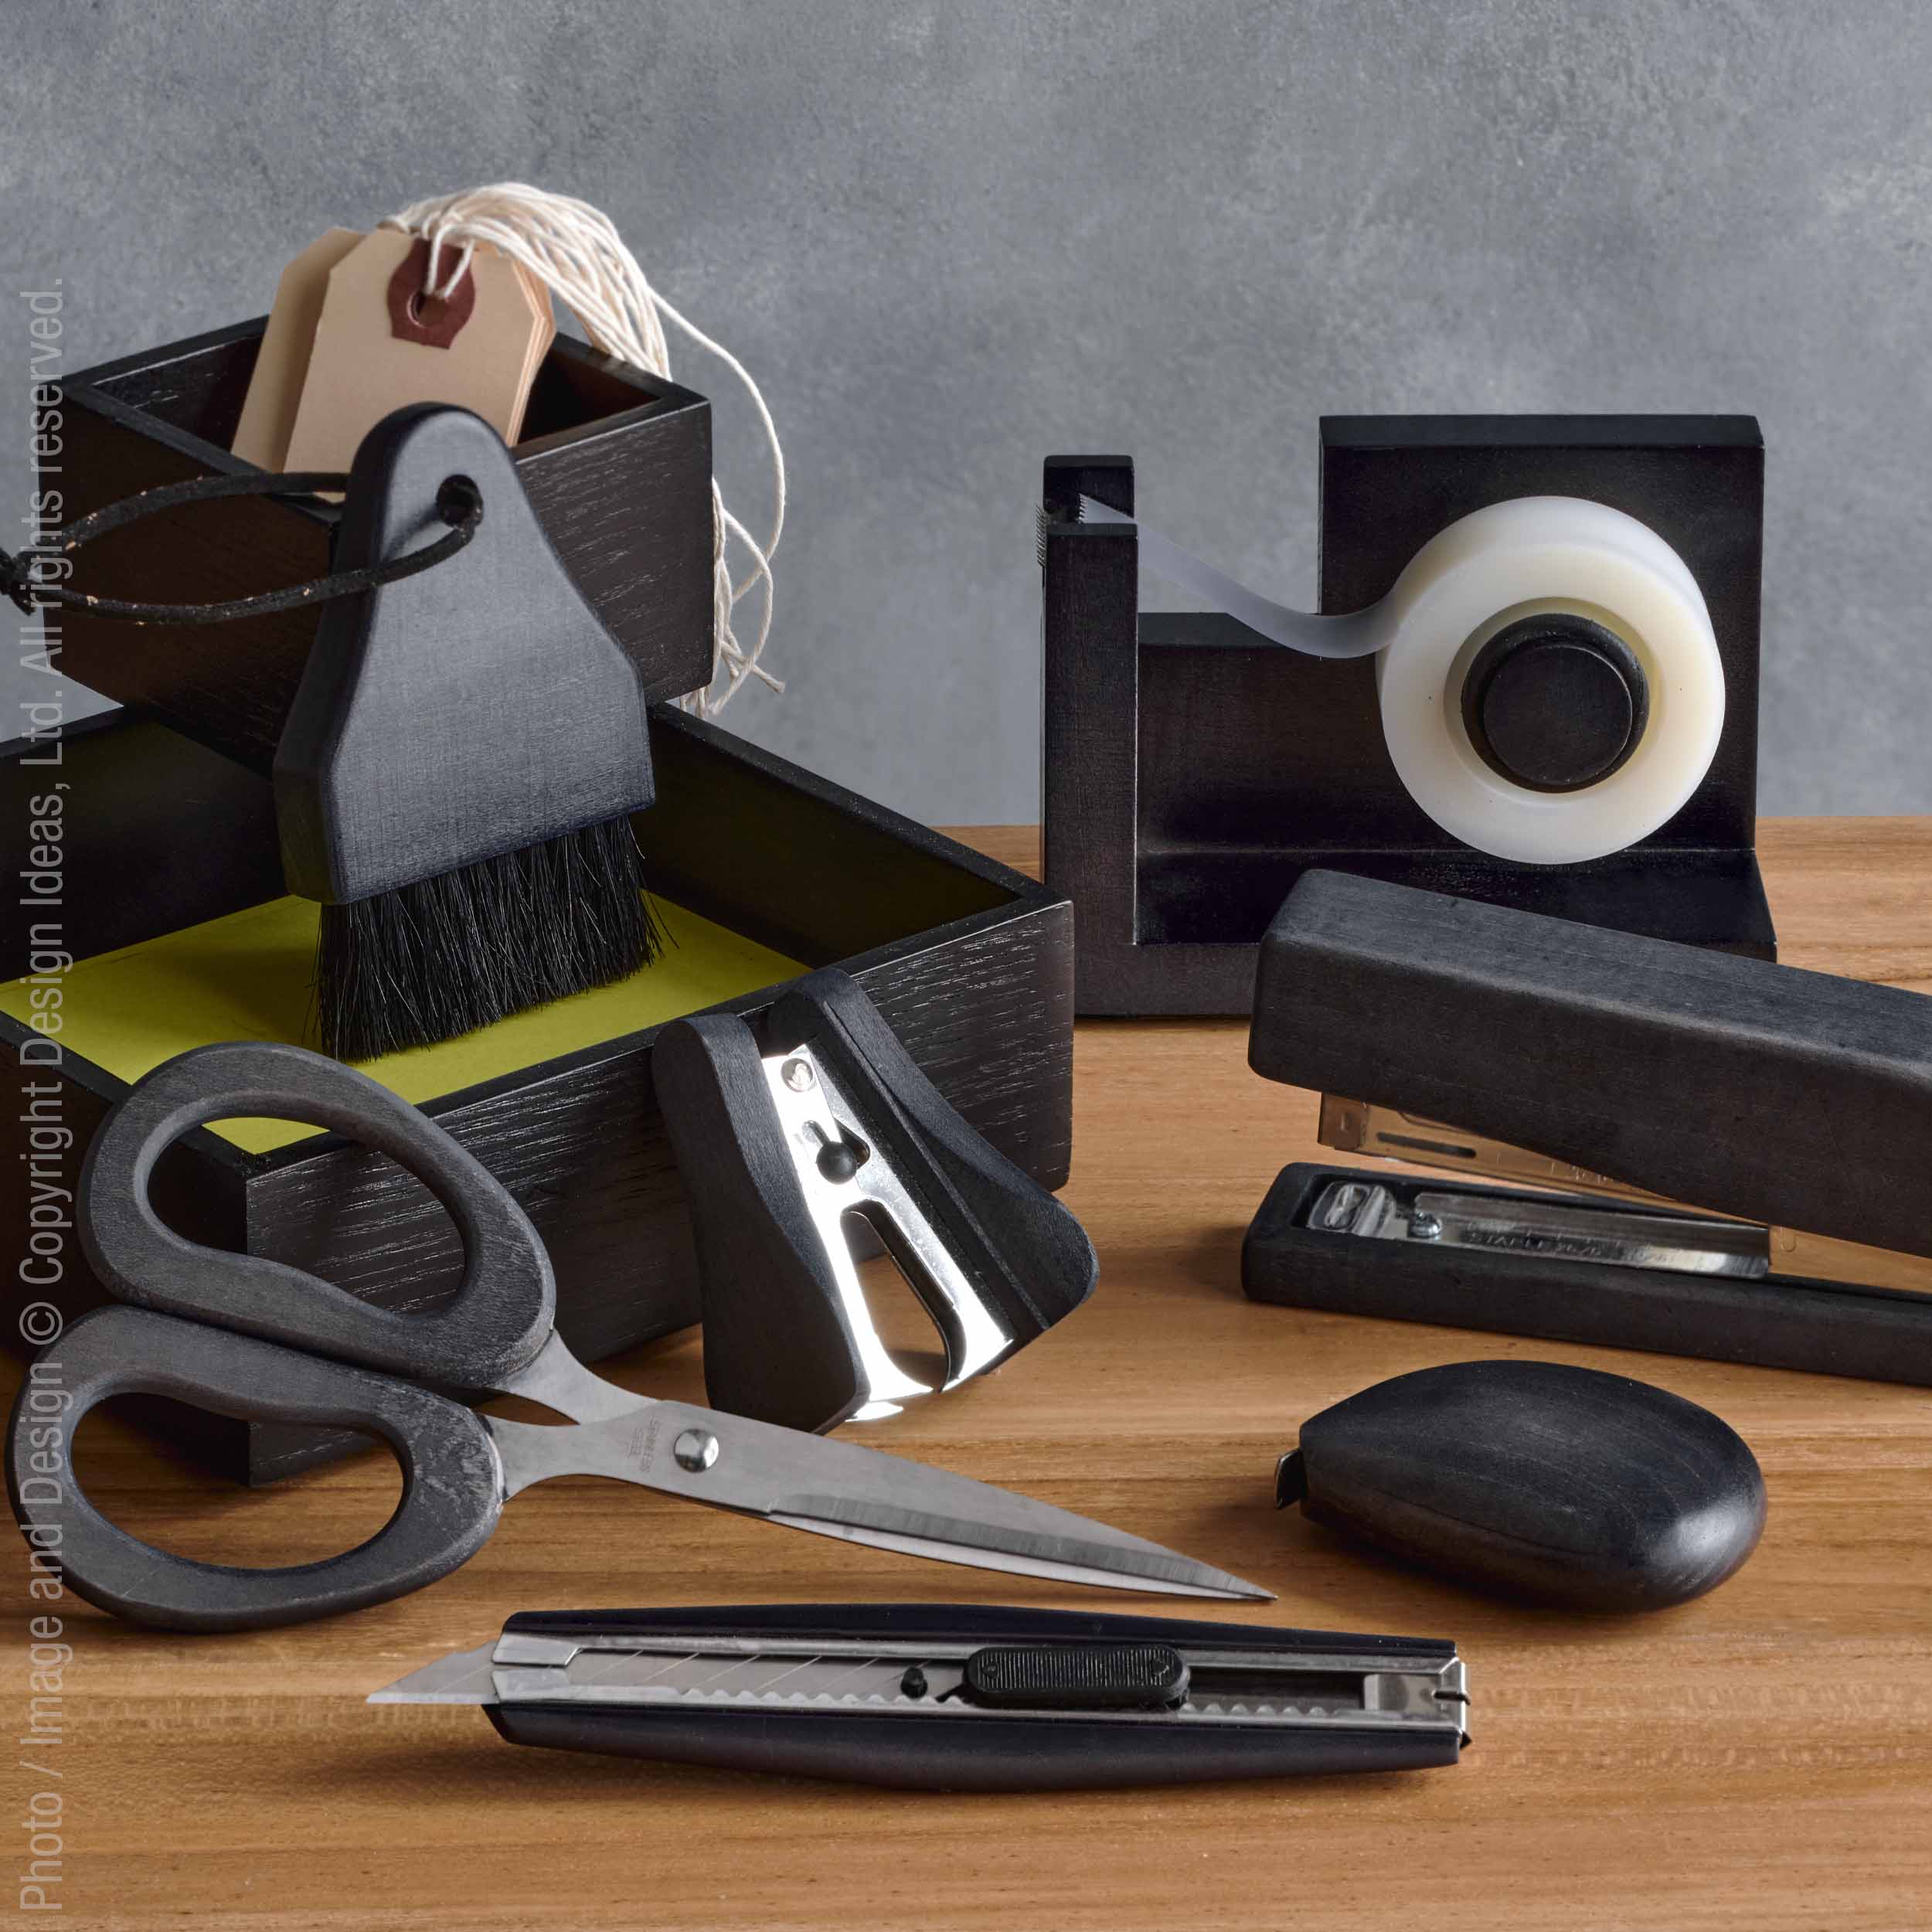 Cokala™ stapler - Black | Image 3 | Premium Desk Accessory from the Cokala collection | made with Sycamore for long lasting use | texxture